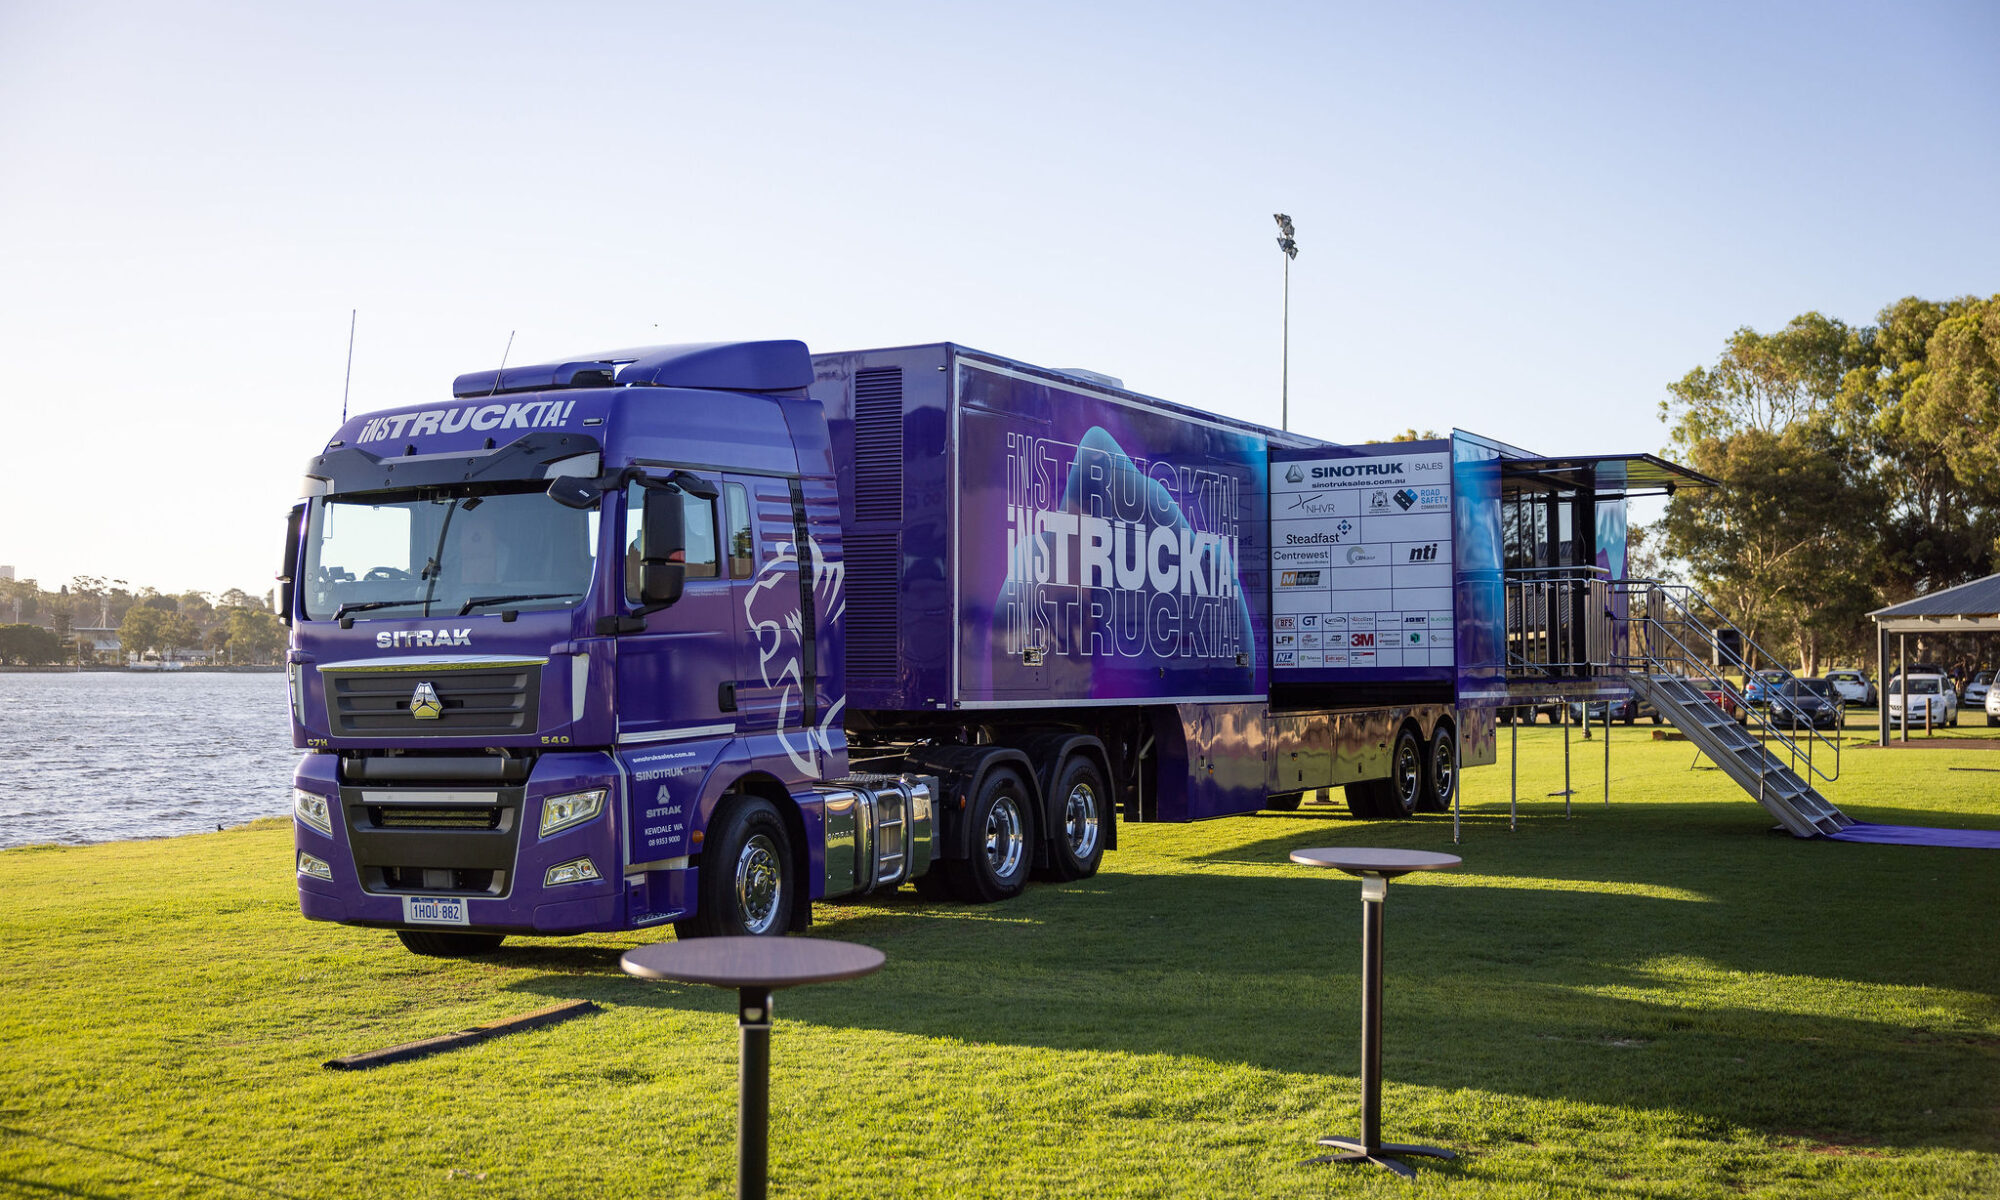 photo showing a large purple semi-trailer truck with iNSTRUCKTA branding. It has a slide-out section opened up on the trailer which folds down to steps so that visitor can access the displays inside.